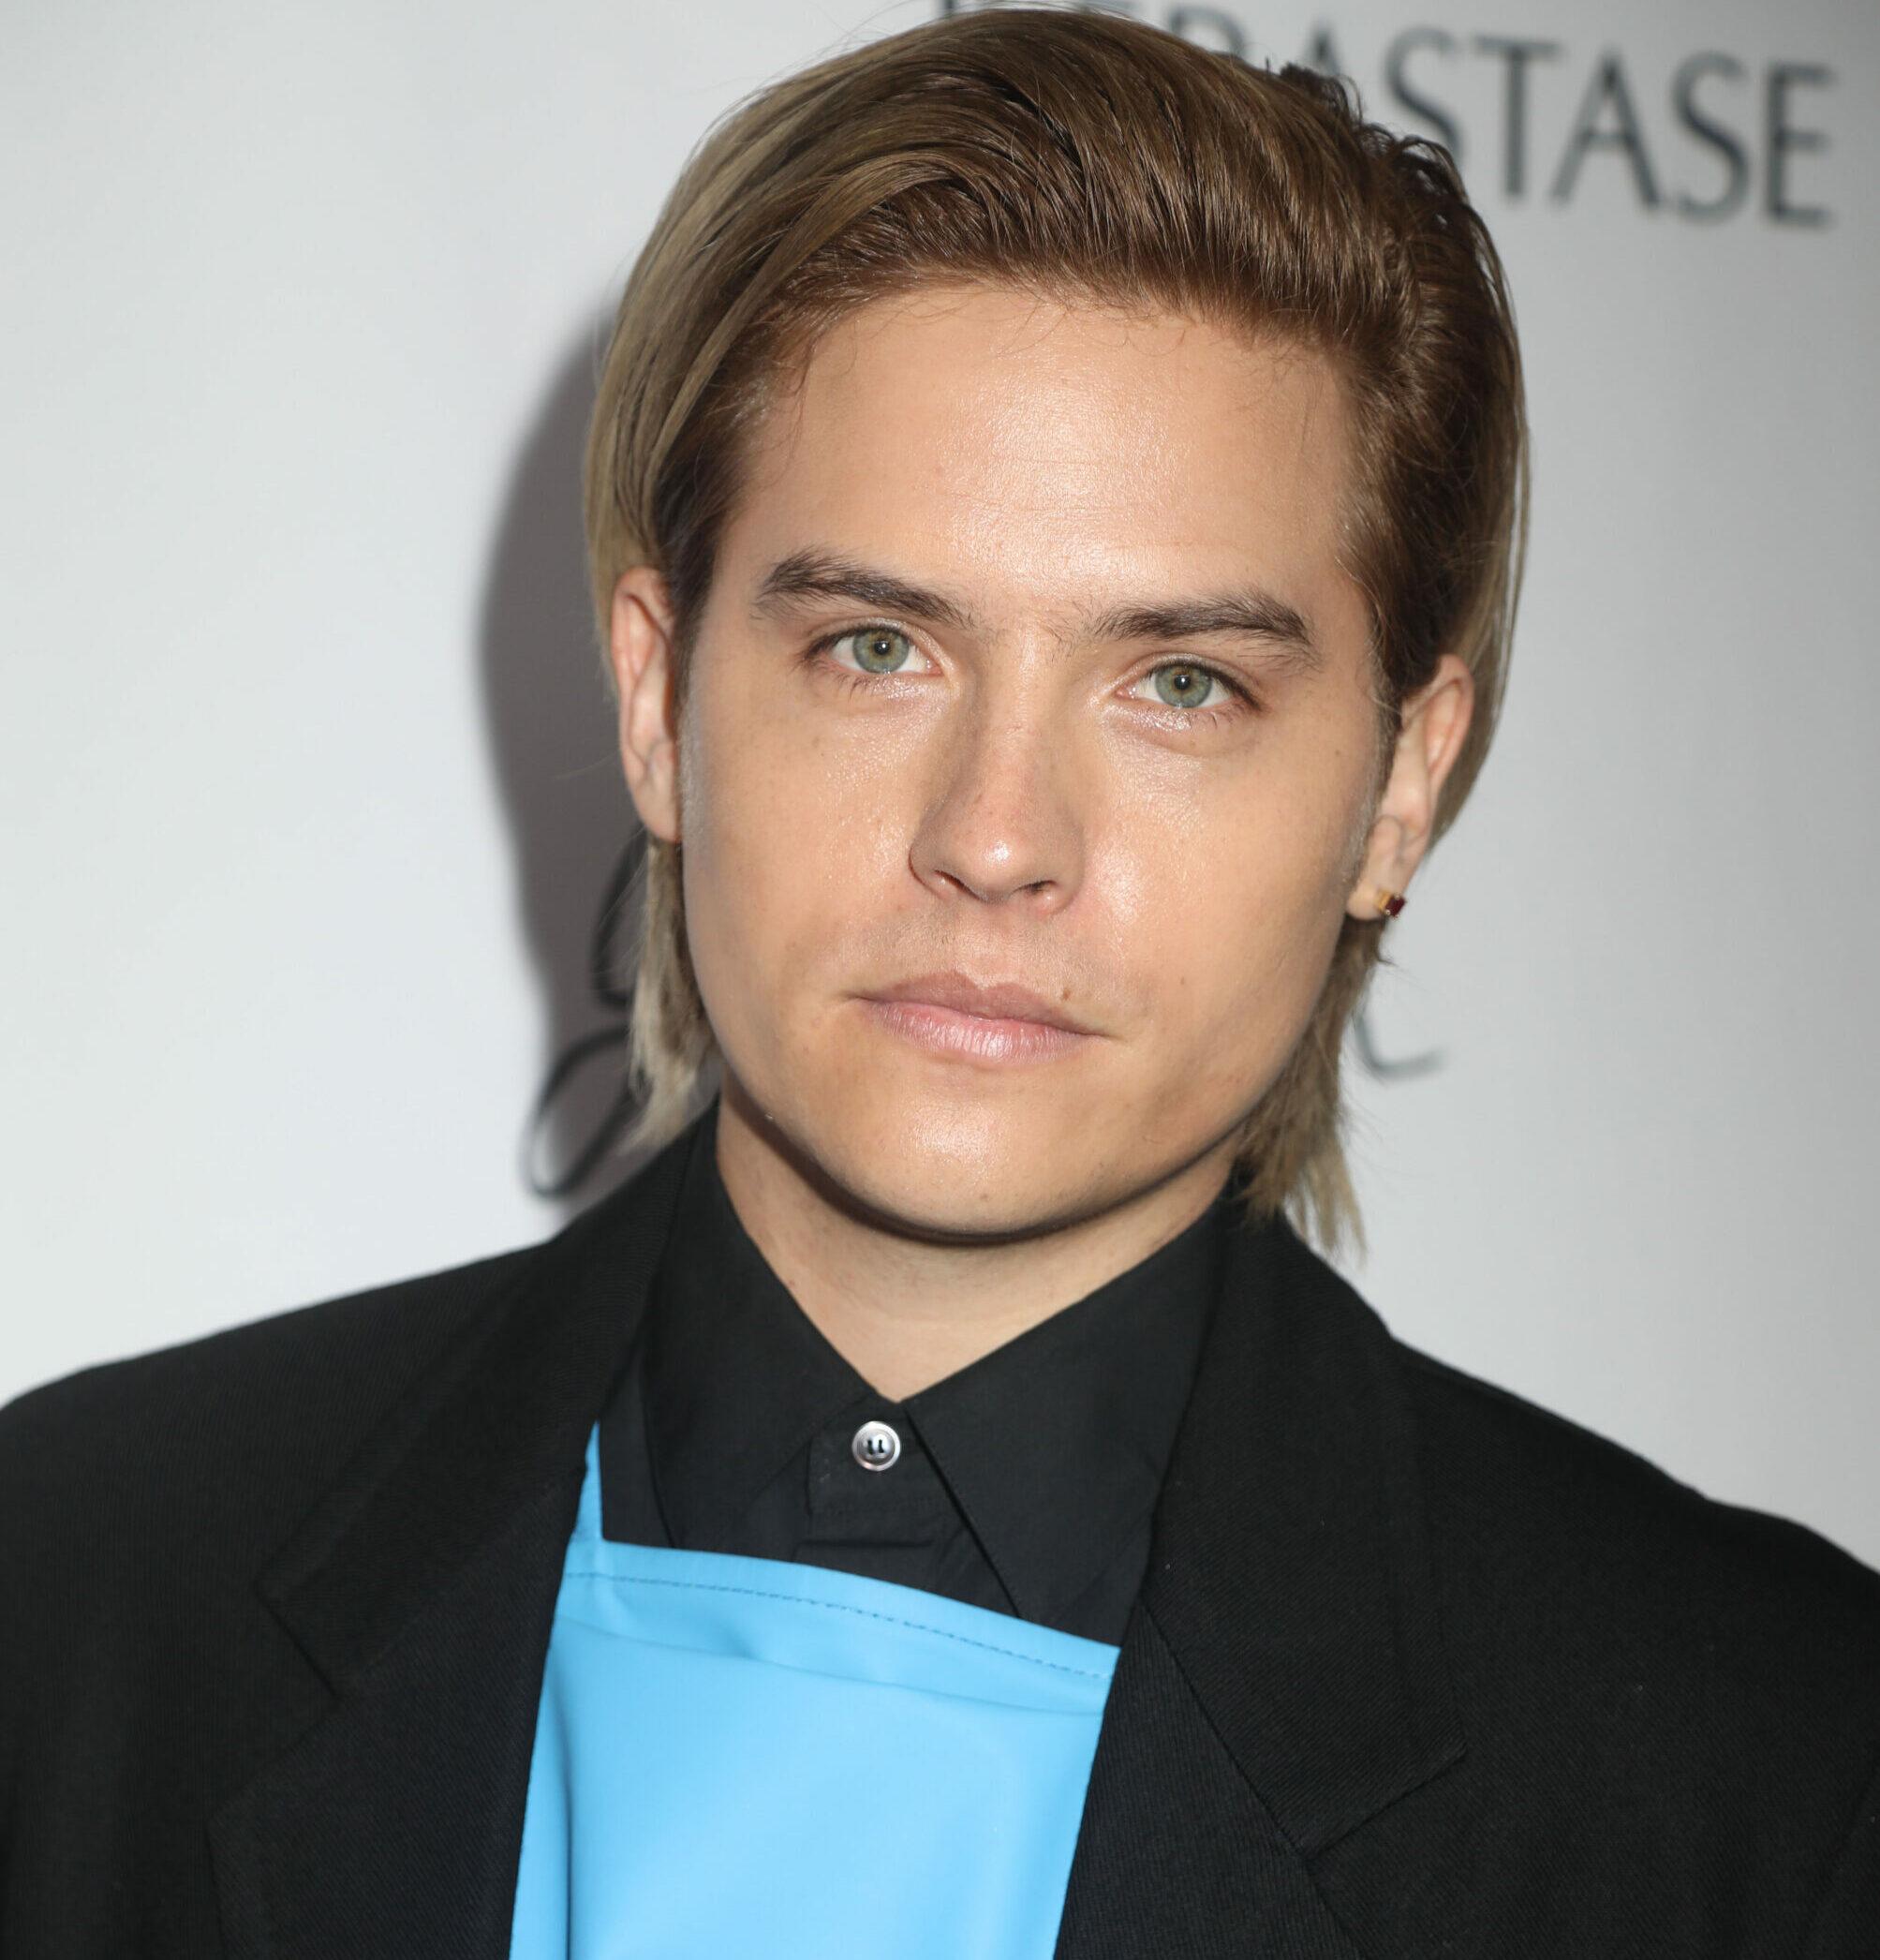 Dylan Sprouse at the Daily Front Row Fashion Media Awards 2021